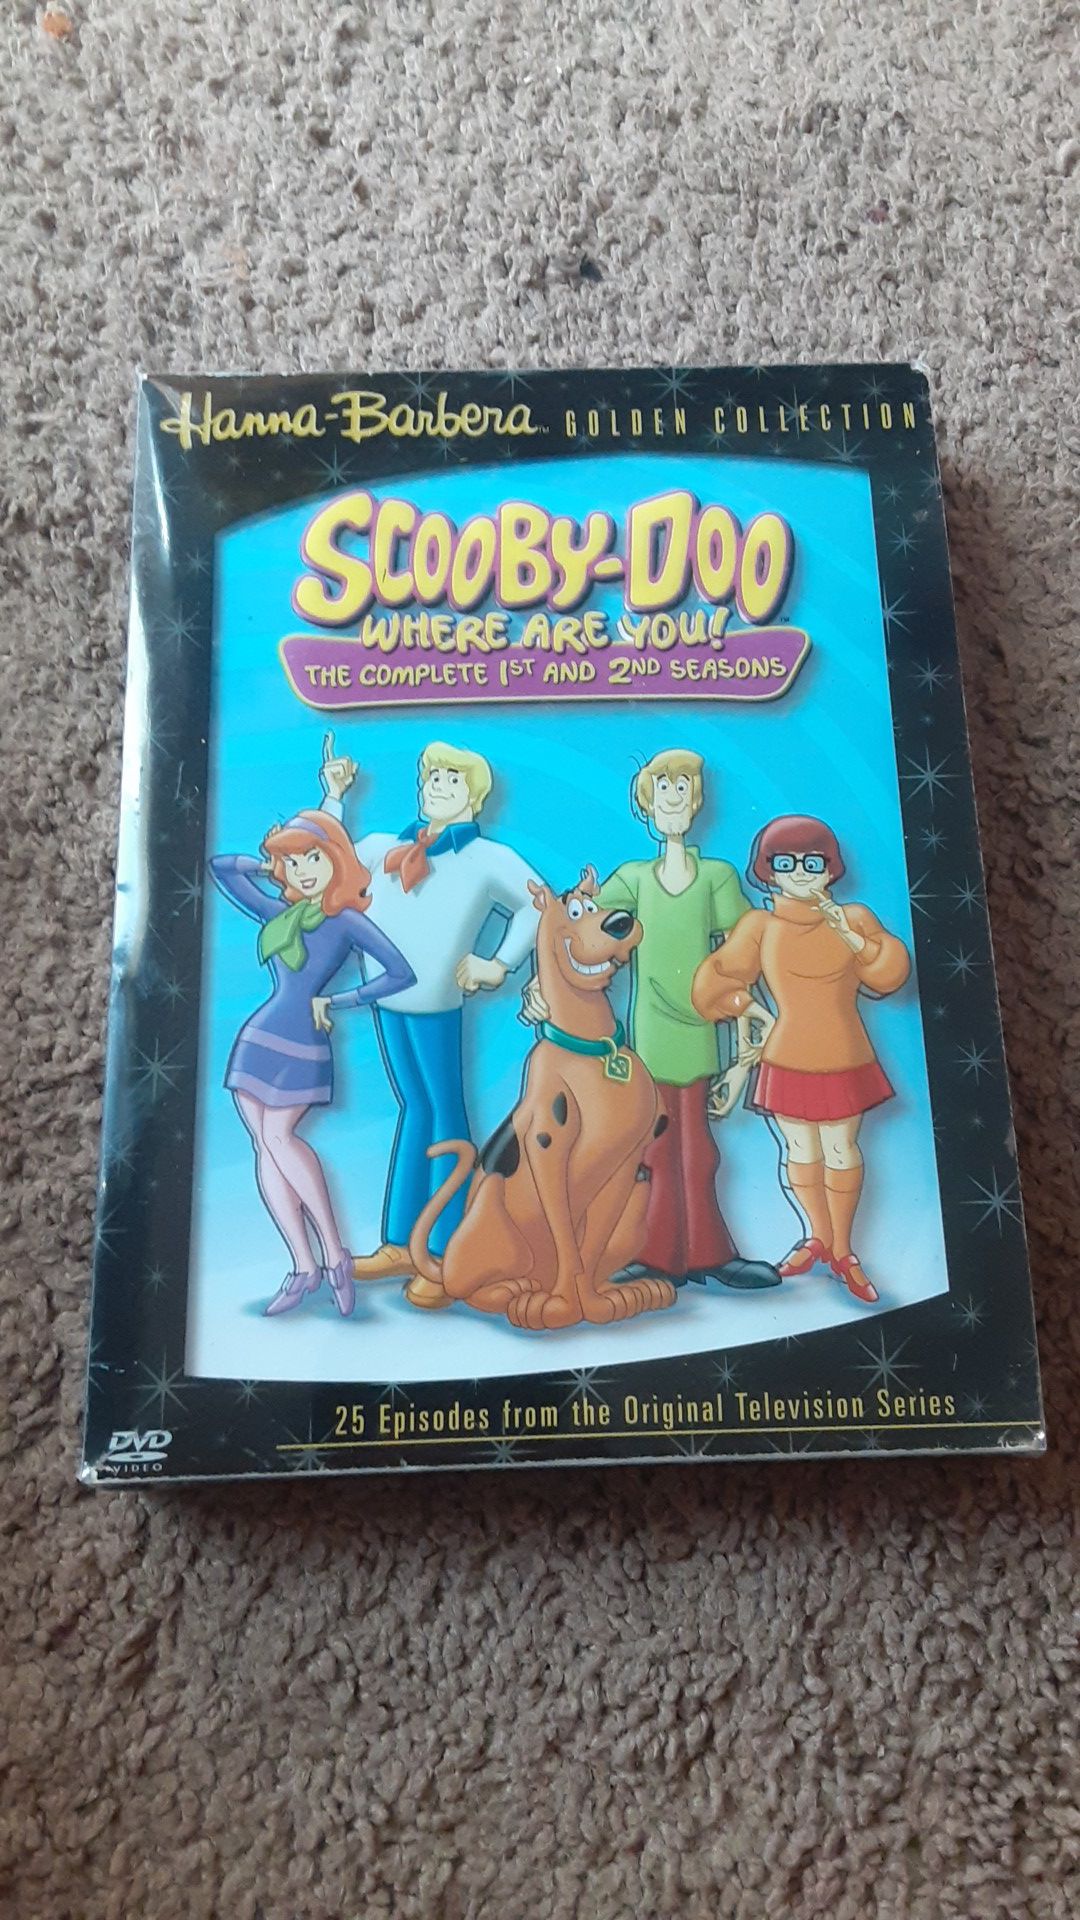 Scooby-Doo Where are you! The complete 1st & 2nd Seasons